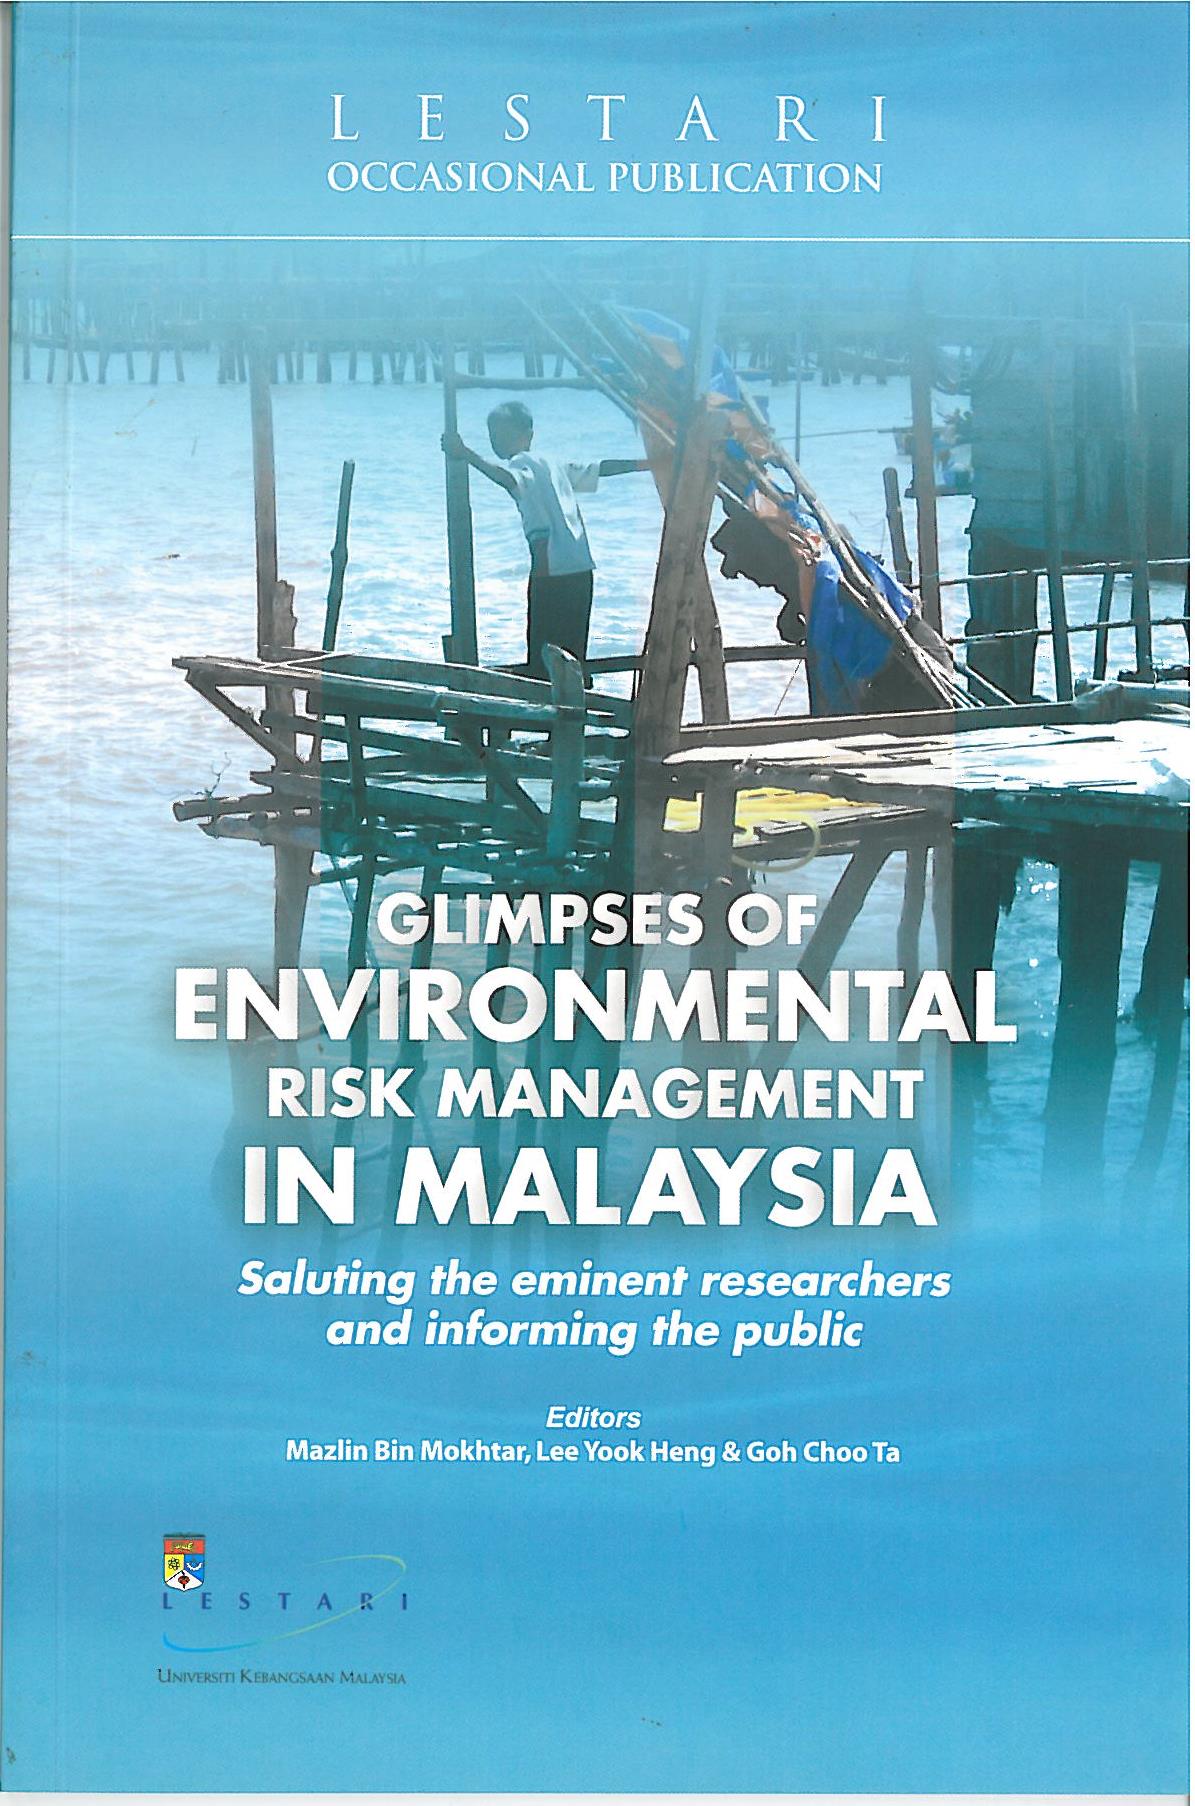 Glimpses of Environmental Risk Management in Malaysia: Saluting the eminent researchers and informing the public